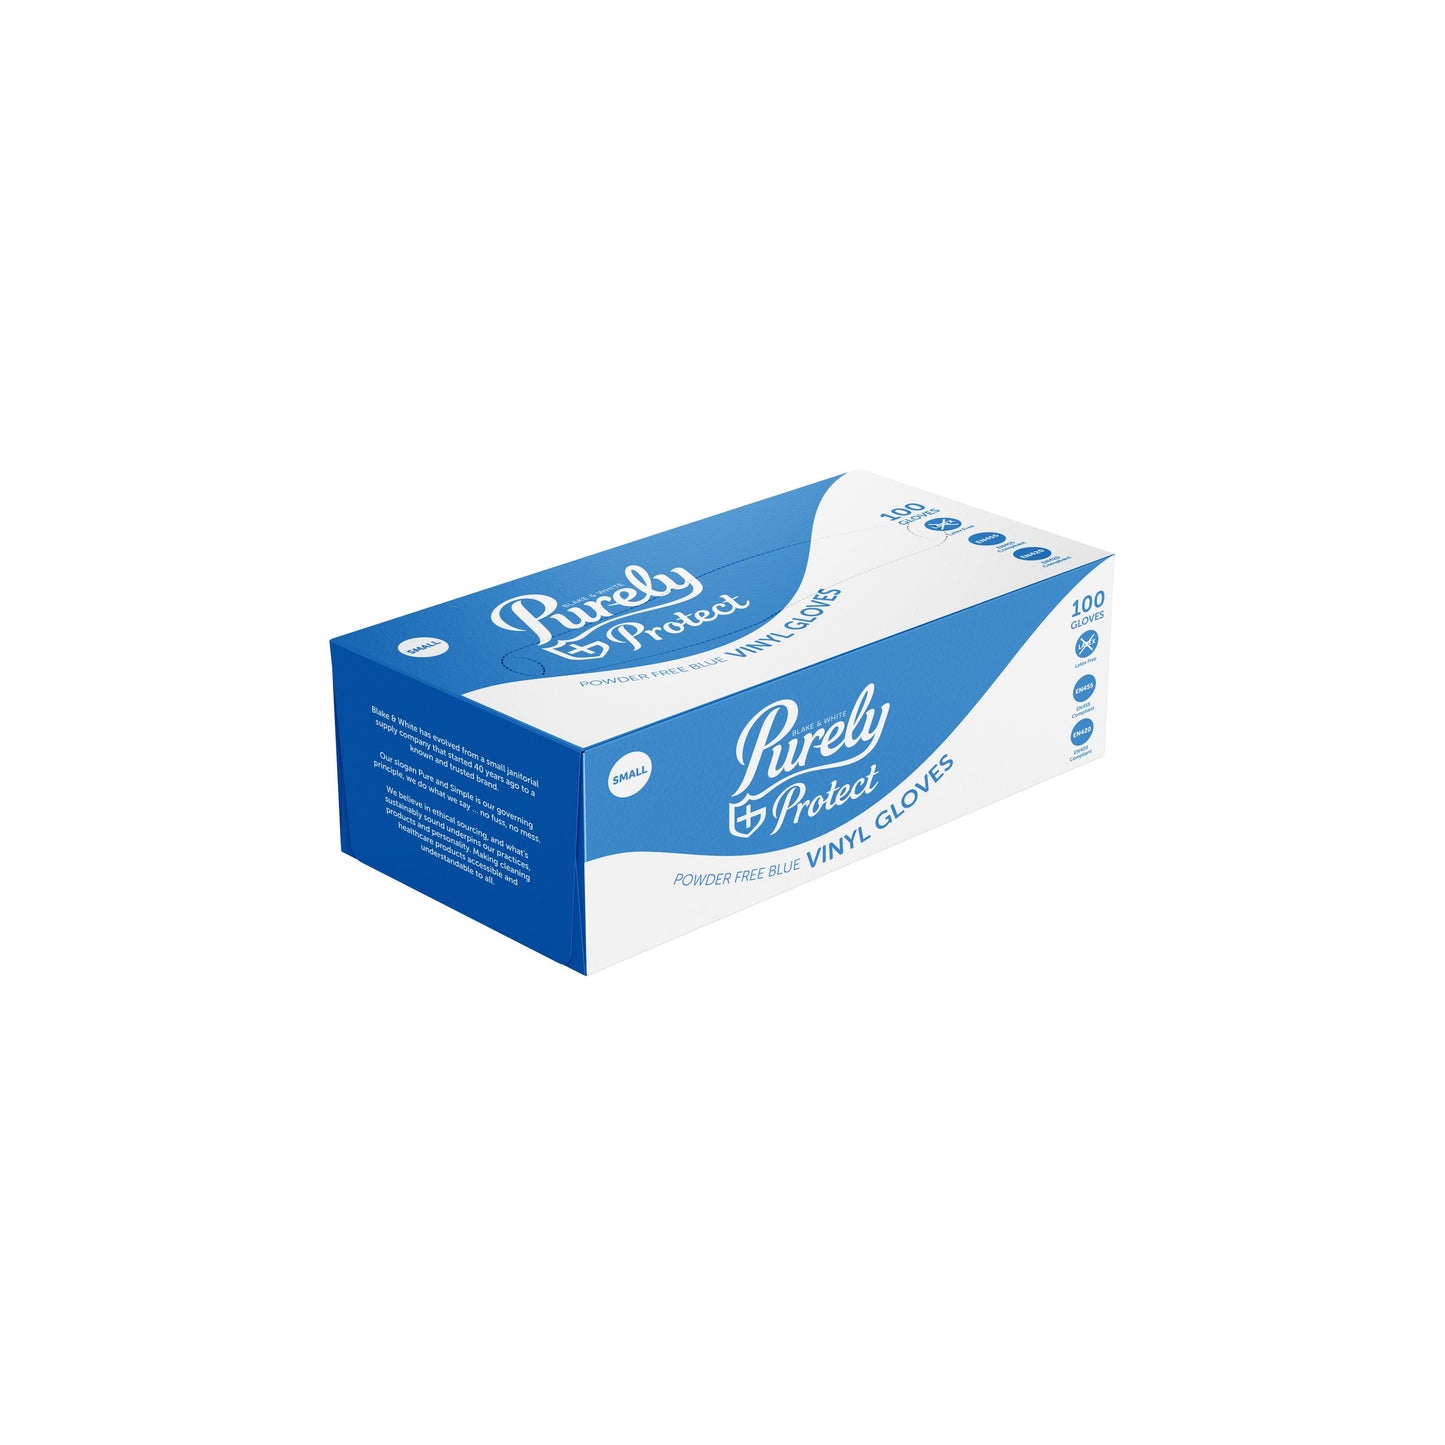 Purely Protect Vinyl Gloves Blue Small Box of 100